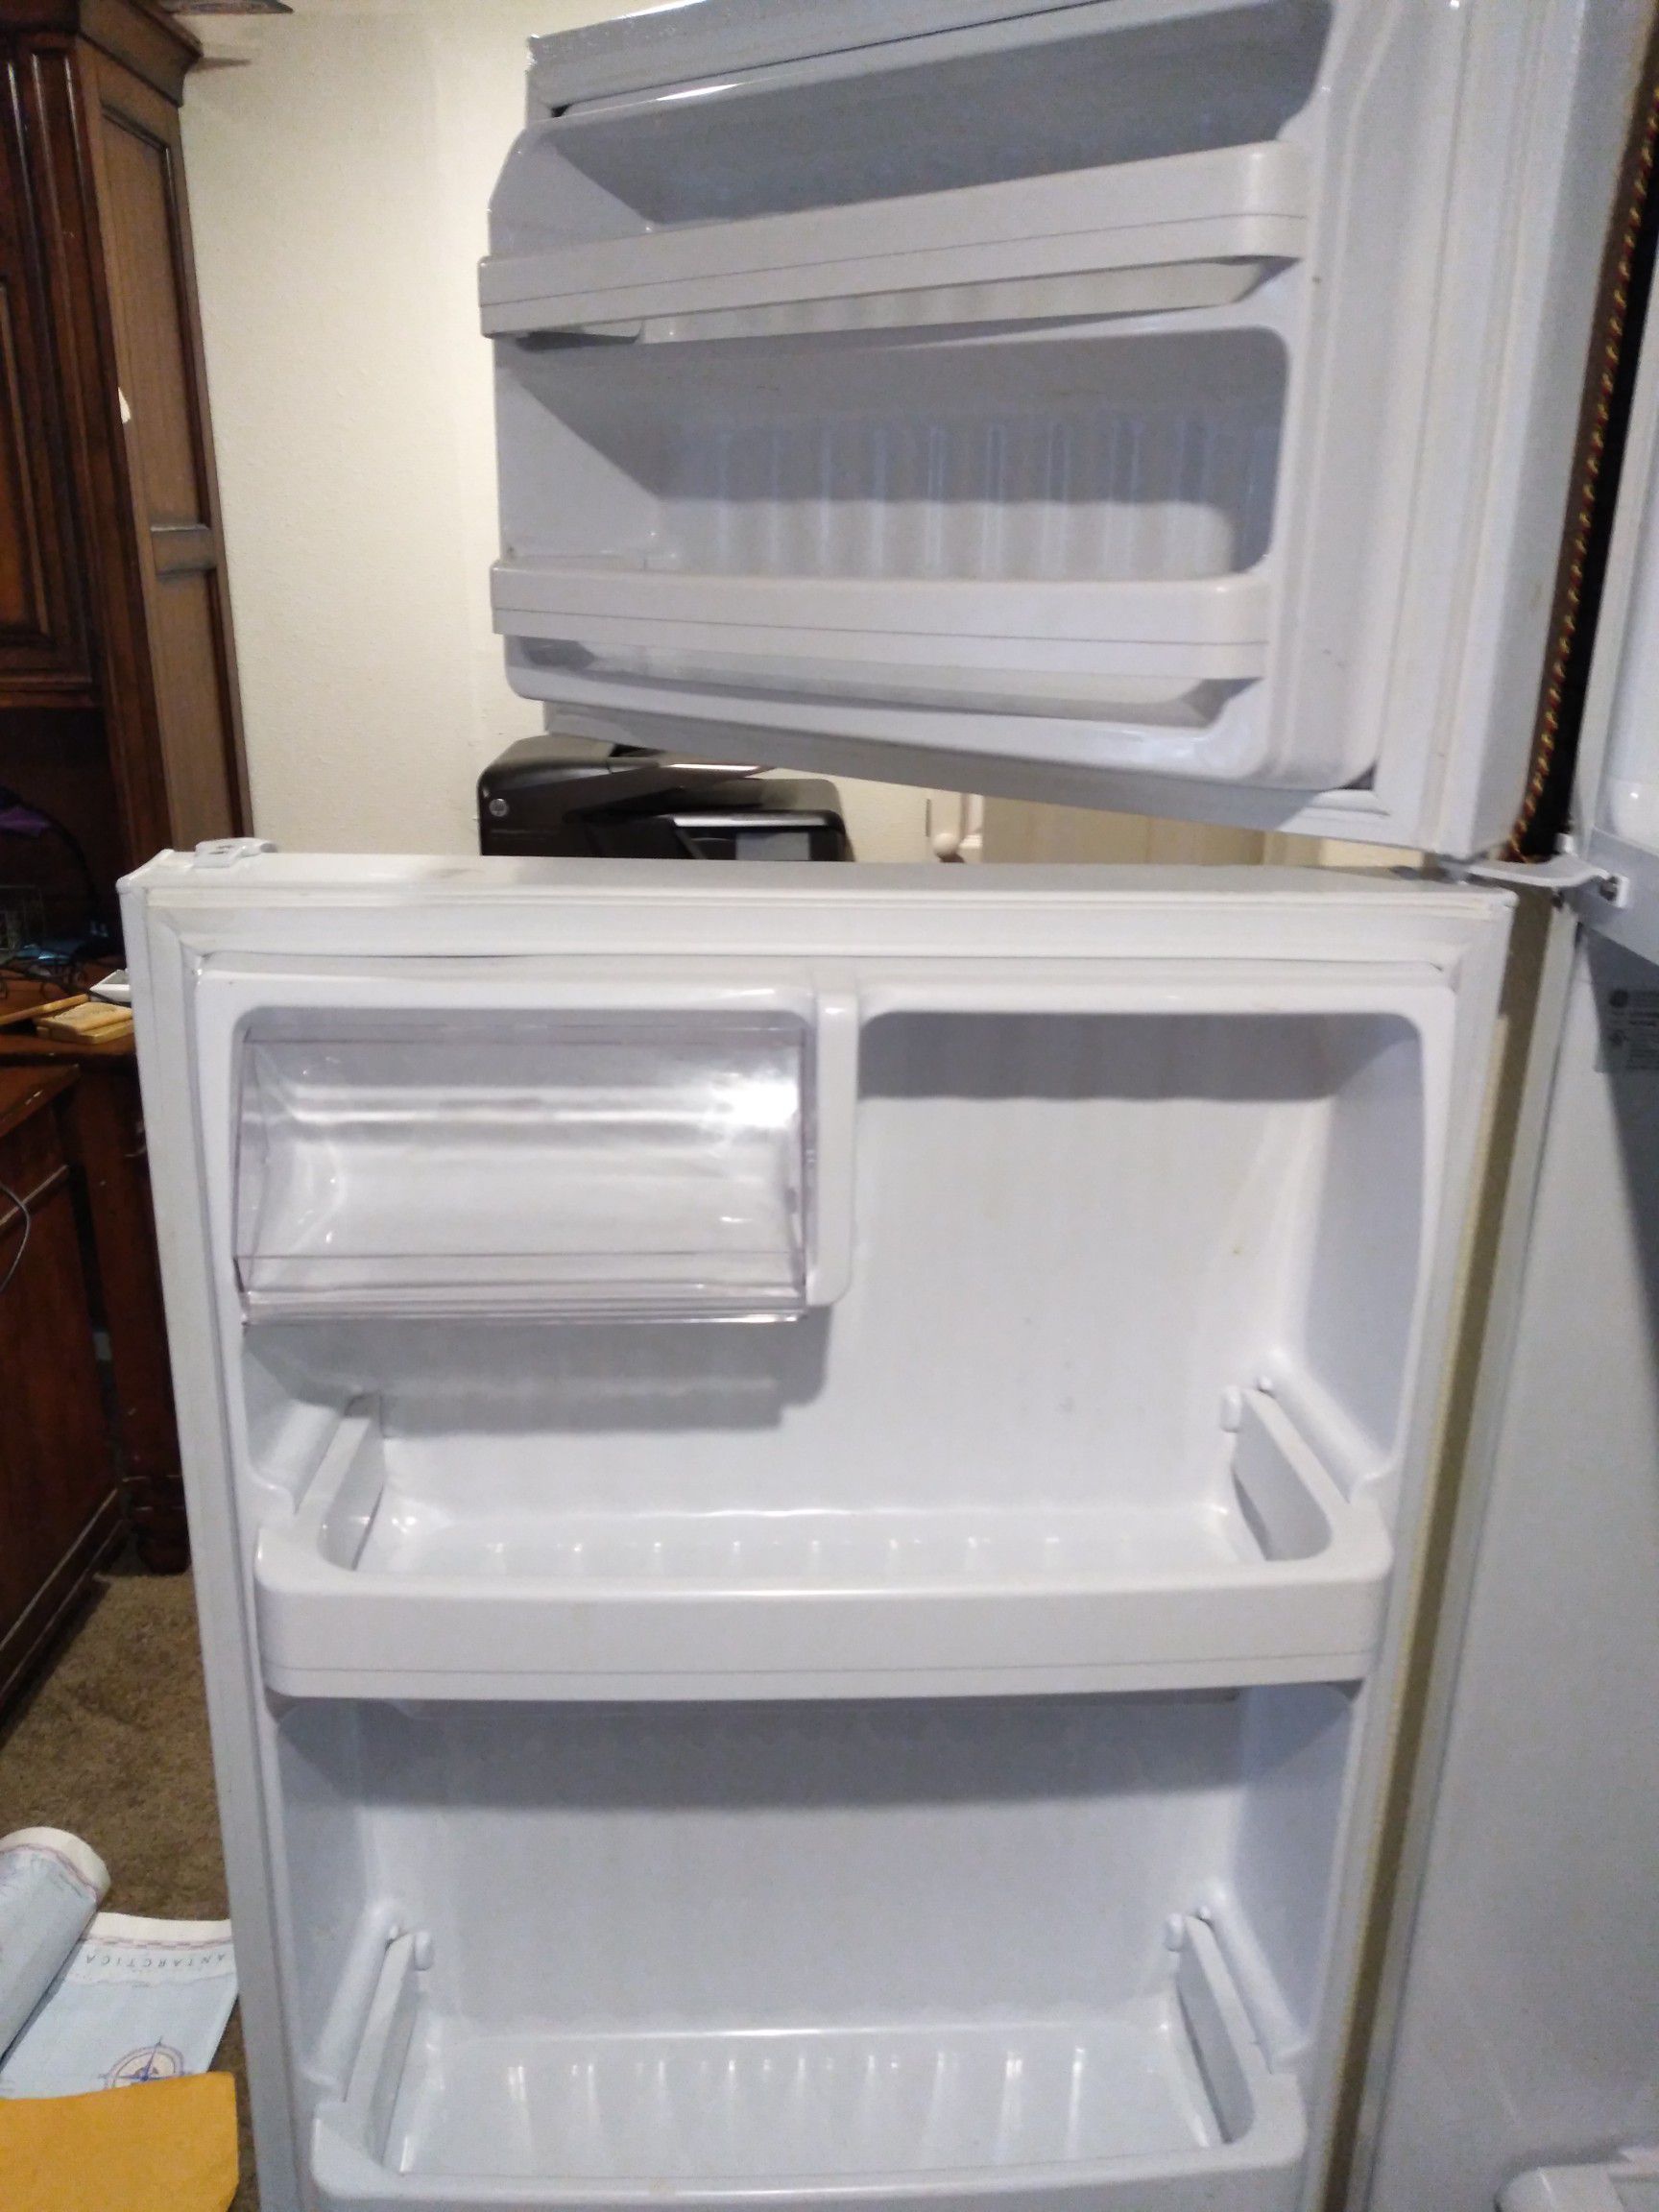 GE refrigerator, like new, year purchased 2007